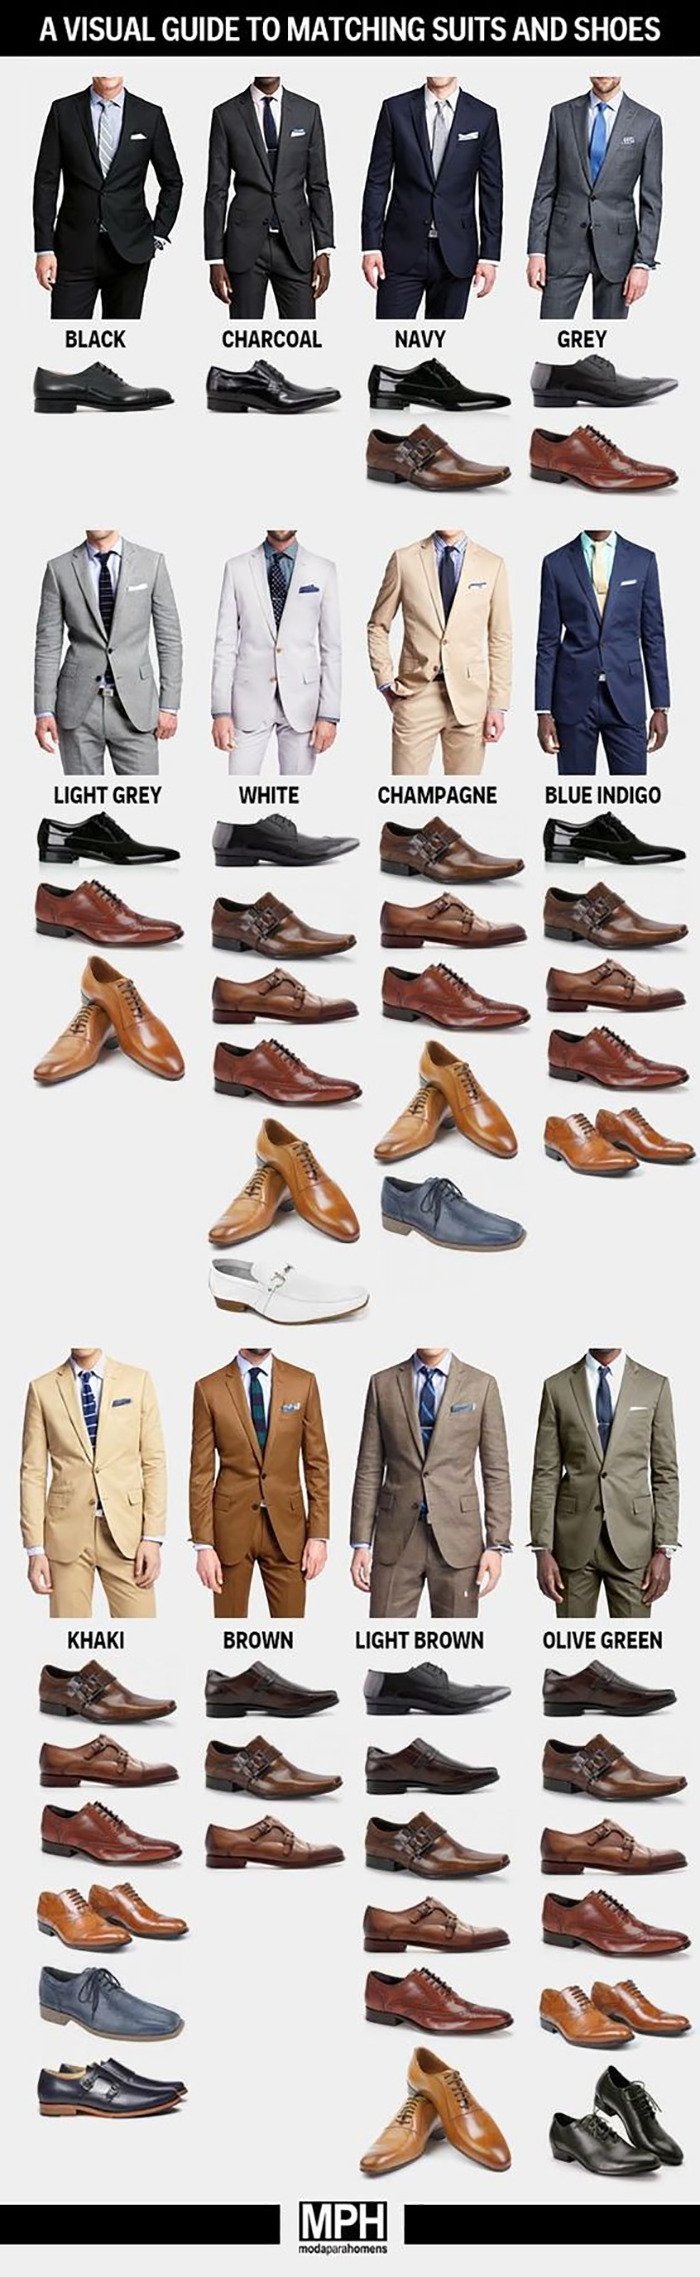 men suit color chart - A Visual Guide To Matching Suits And Shoes Black Charcoal Navy Grey Light Grey White Champagne Blue Indigo Khaki Brown Light Brown Olive Green 19 Mph modaparahomens